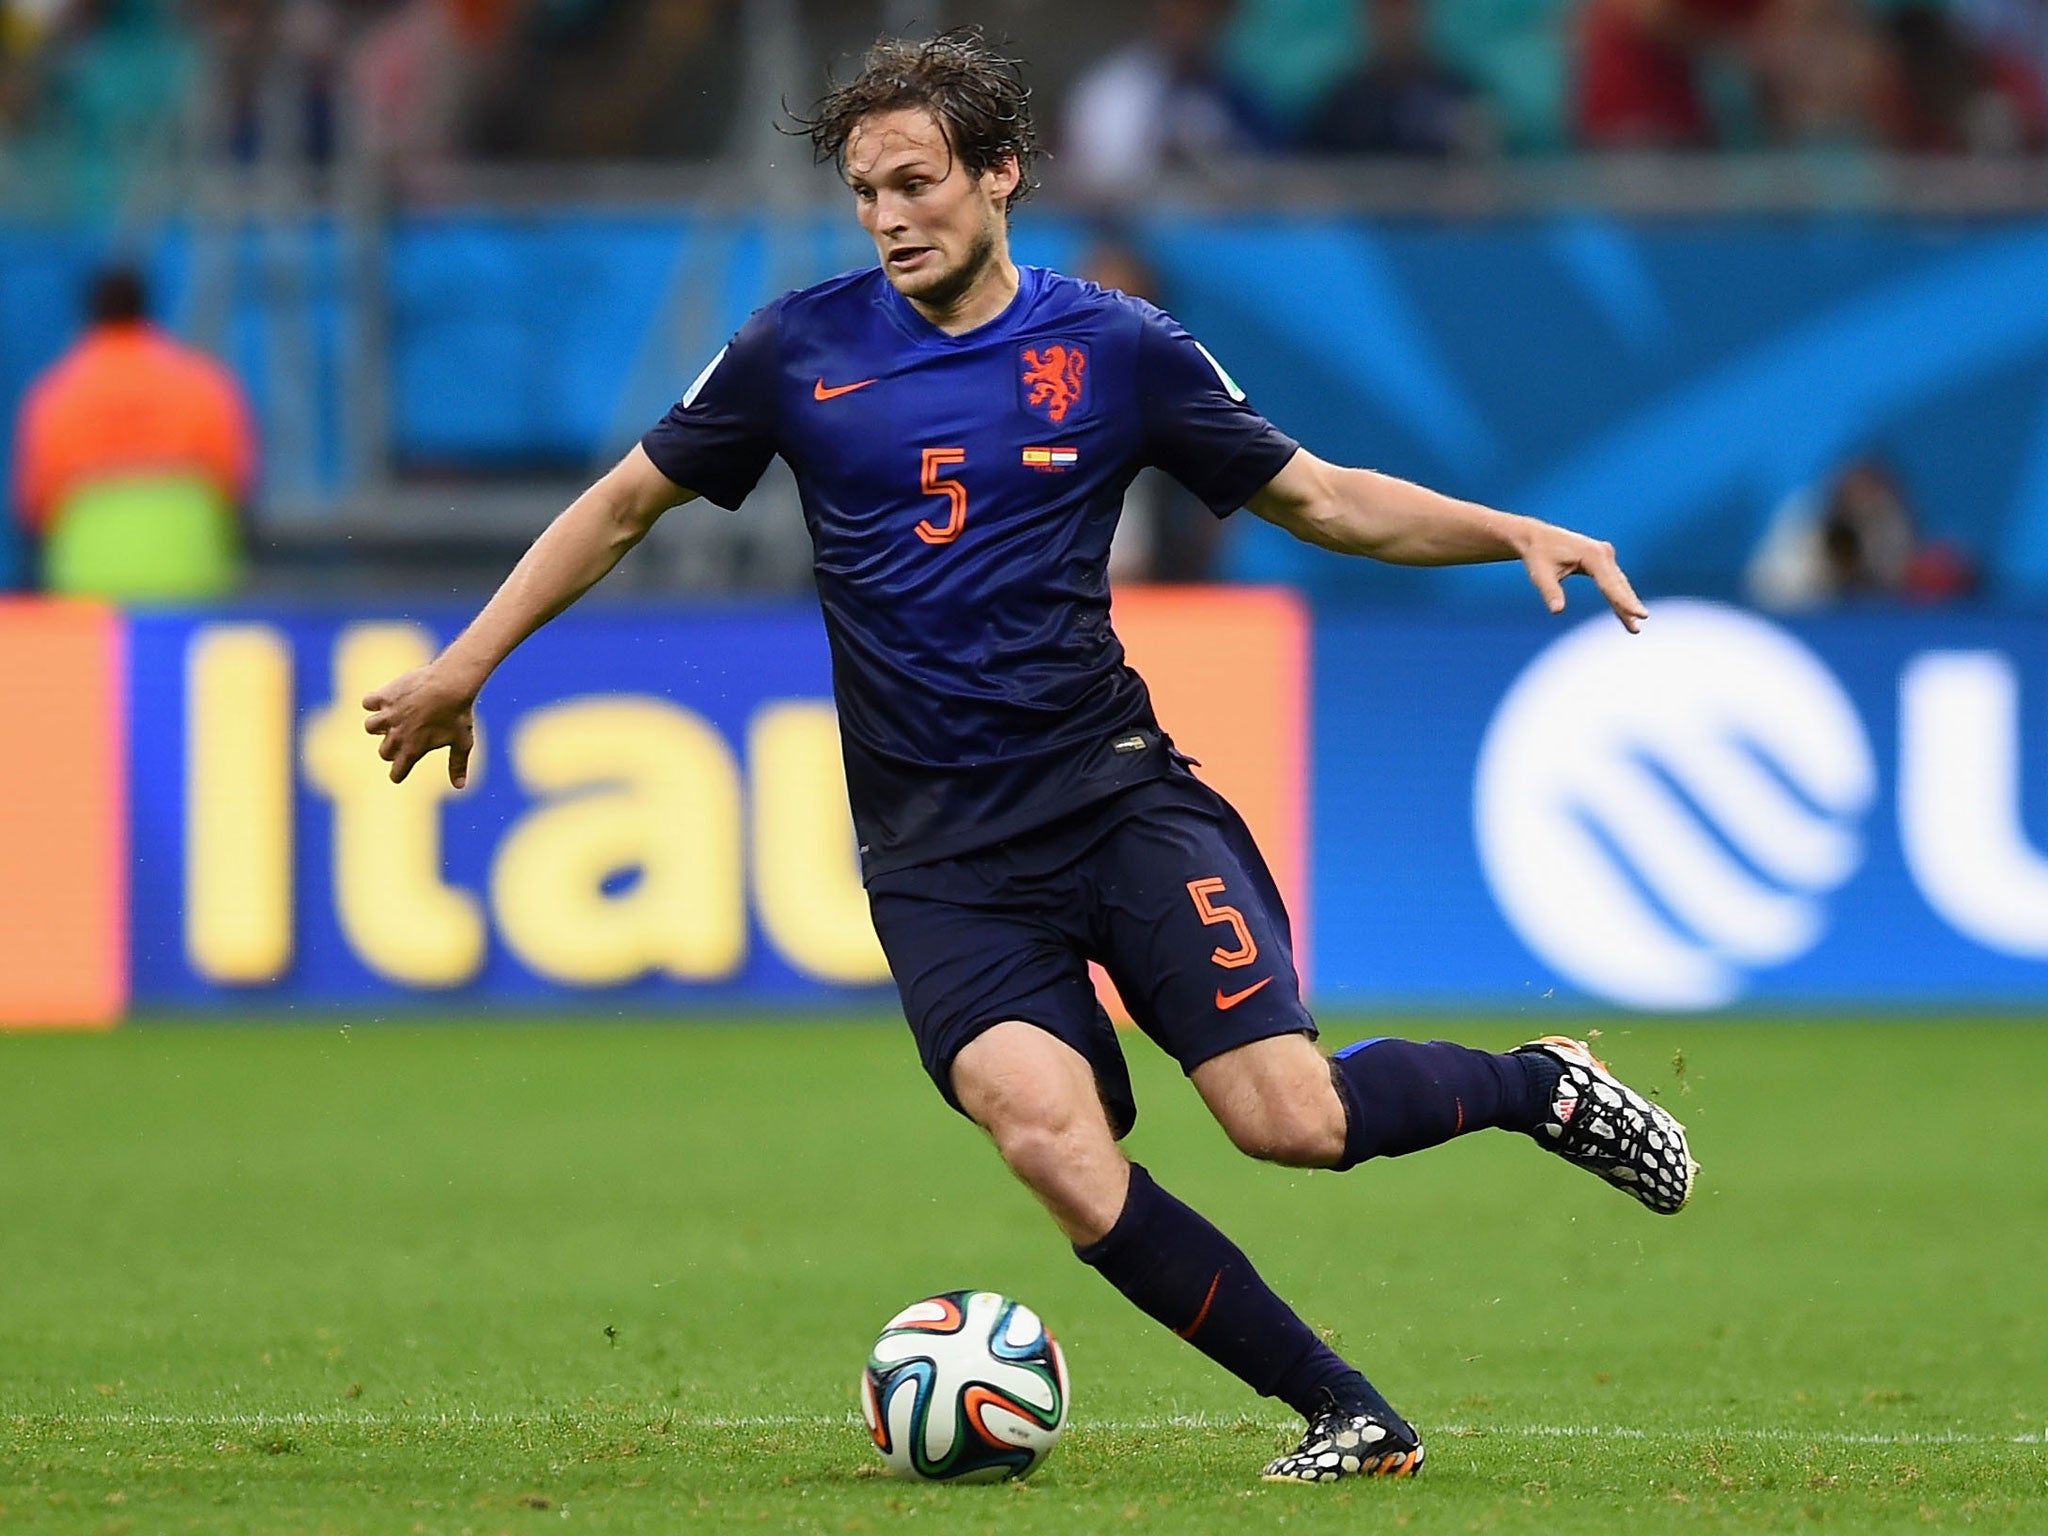 Daley Blind in action for the Netherlands during the World Cup